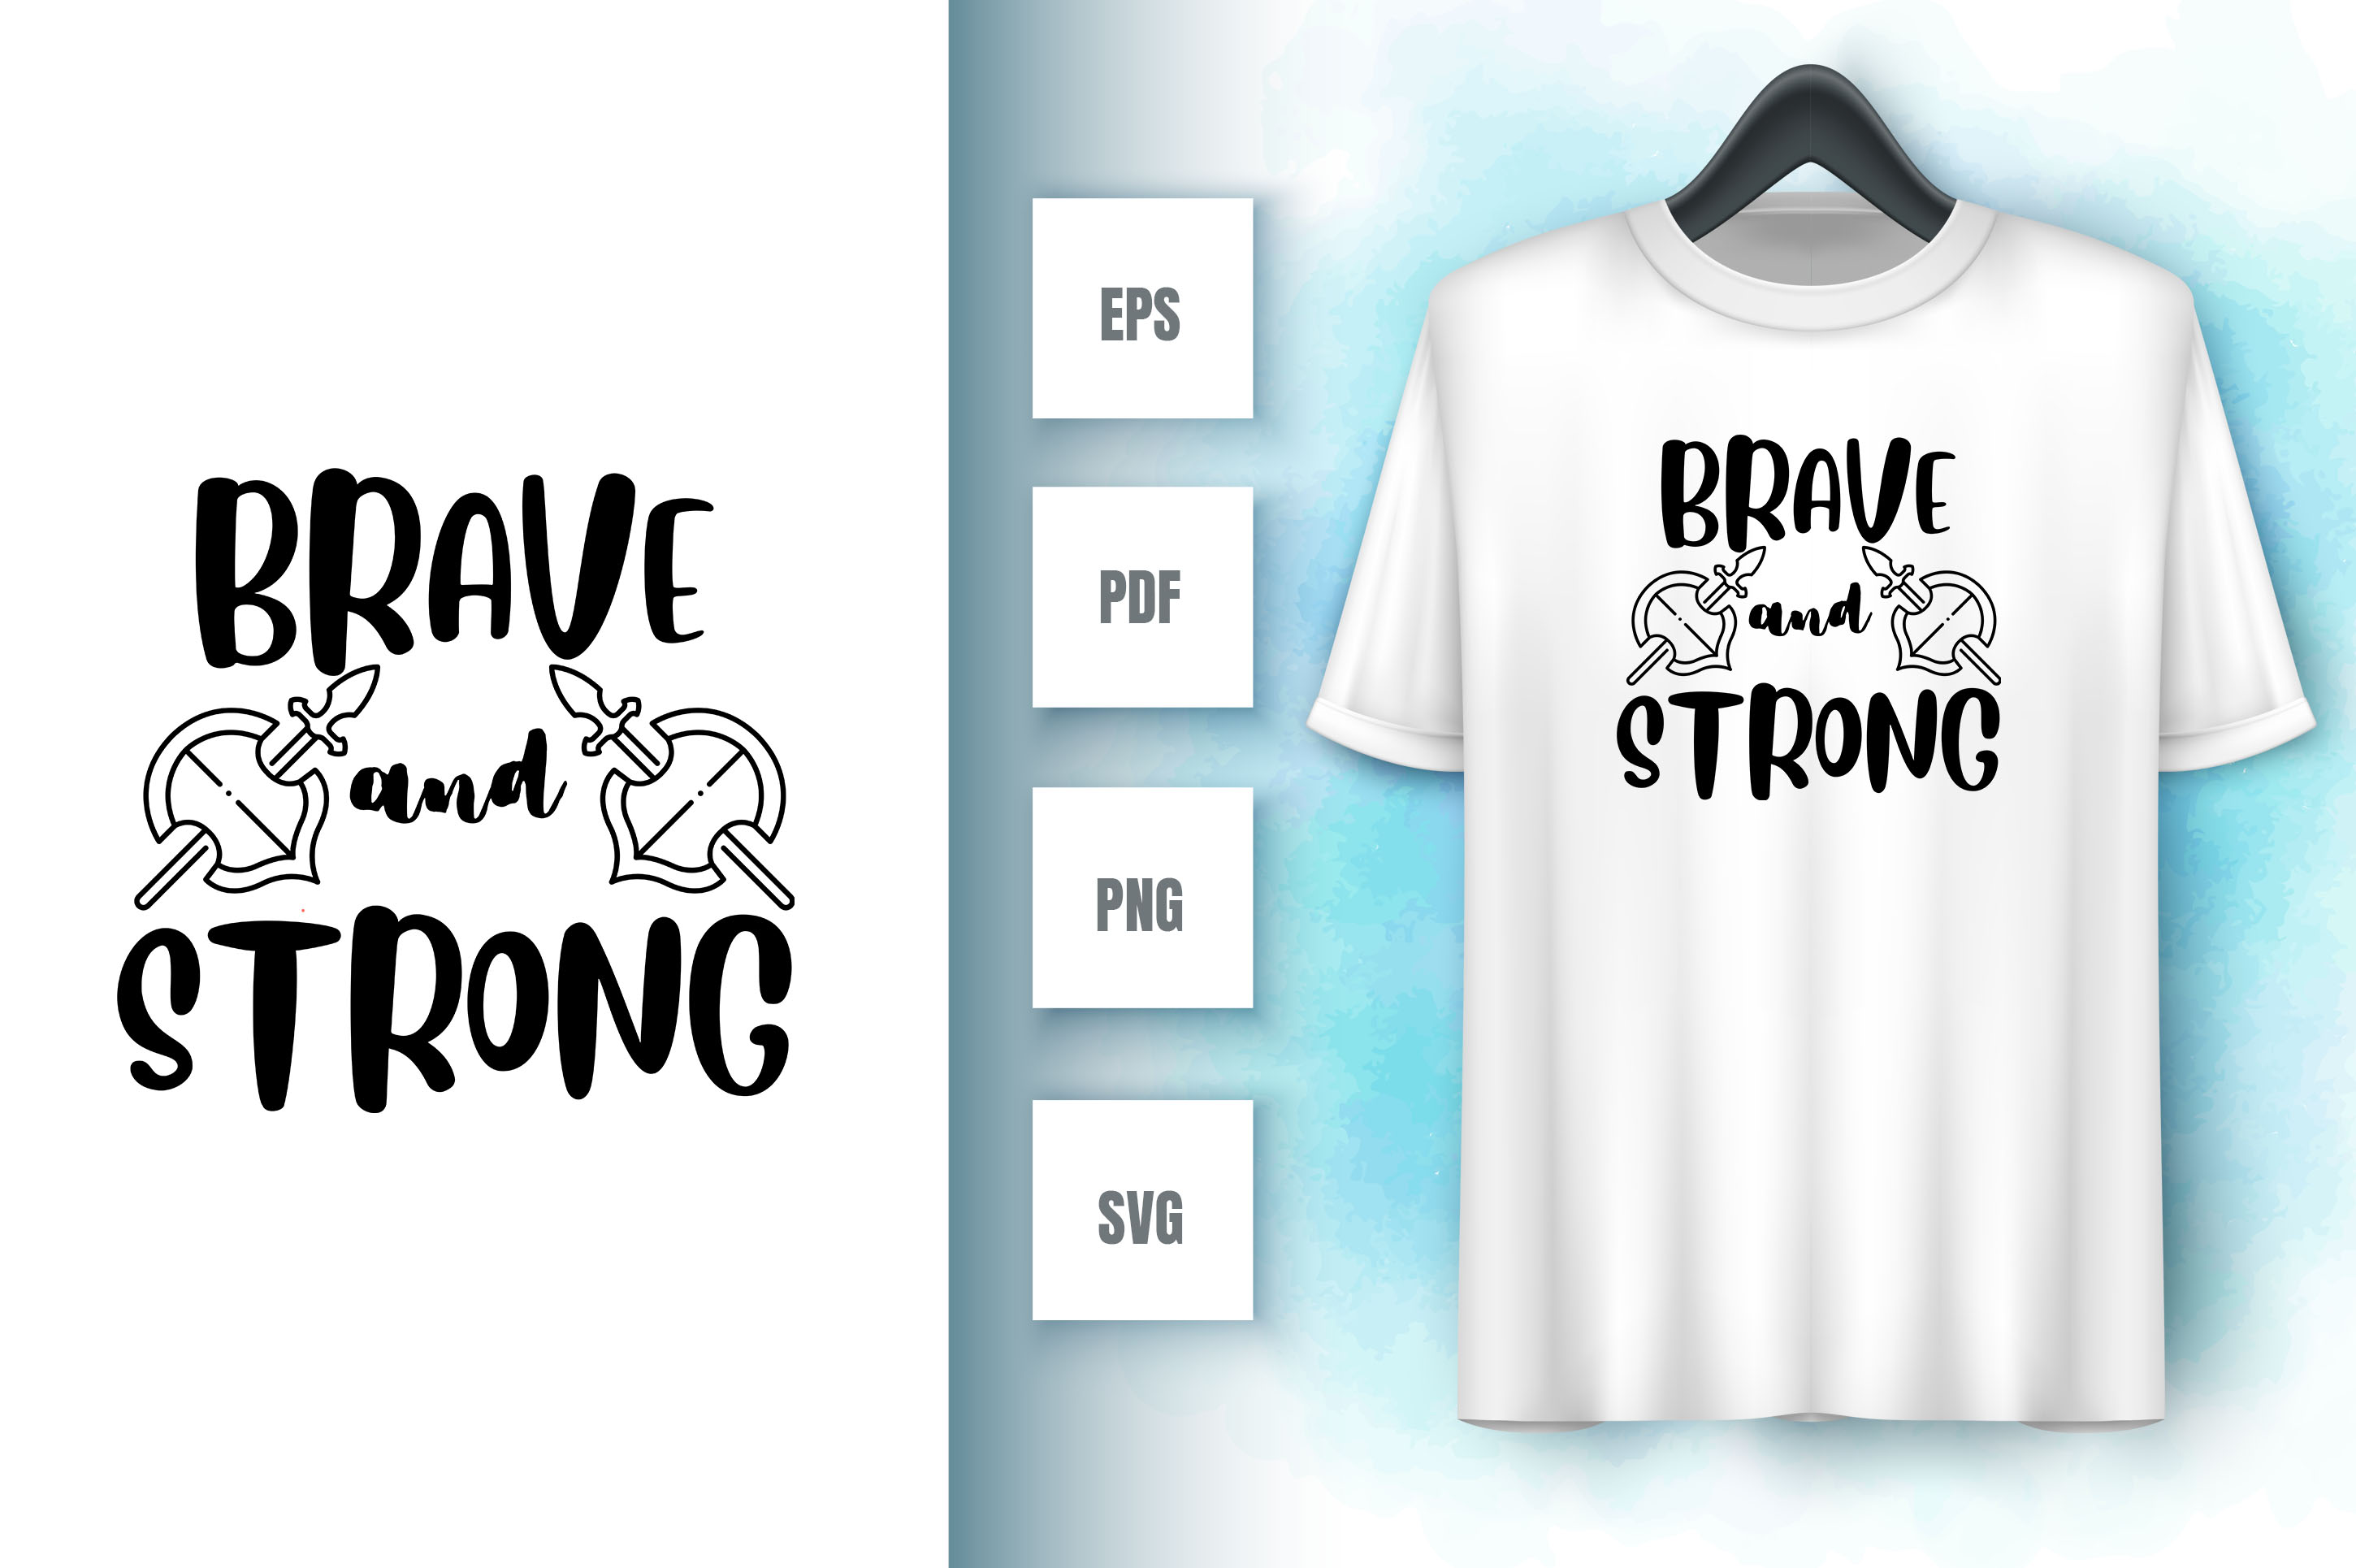 Image of a white t-shirt with an amazing inscription brave and strong